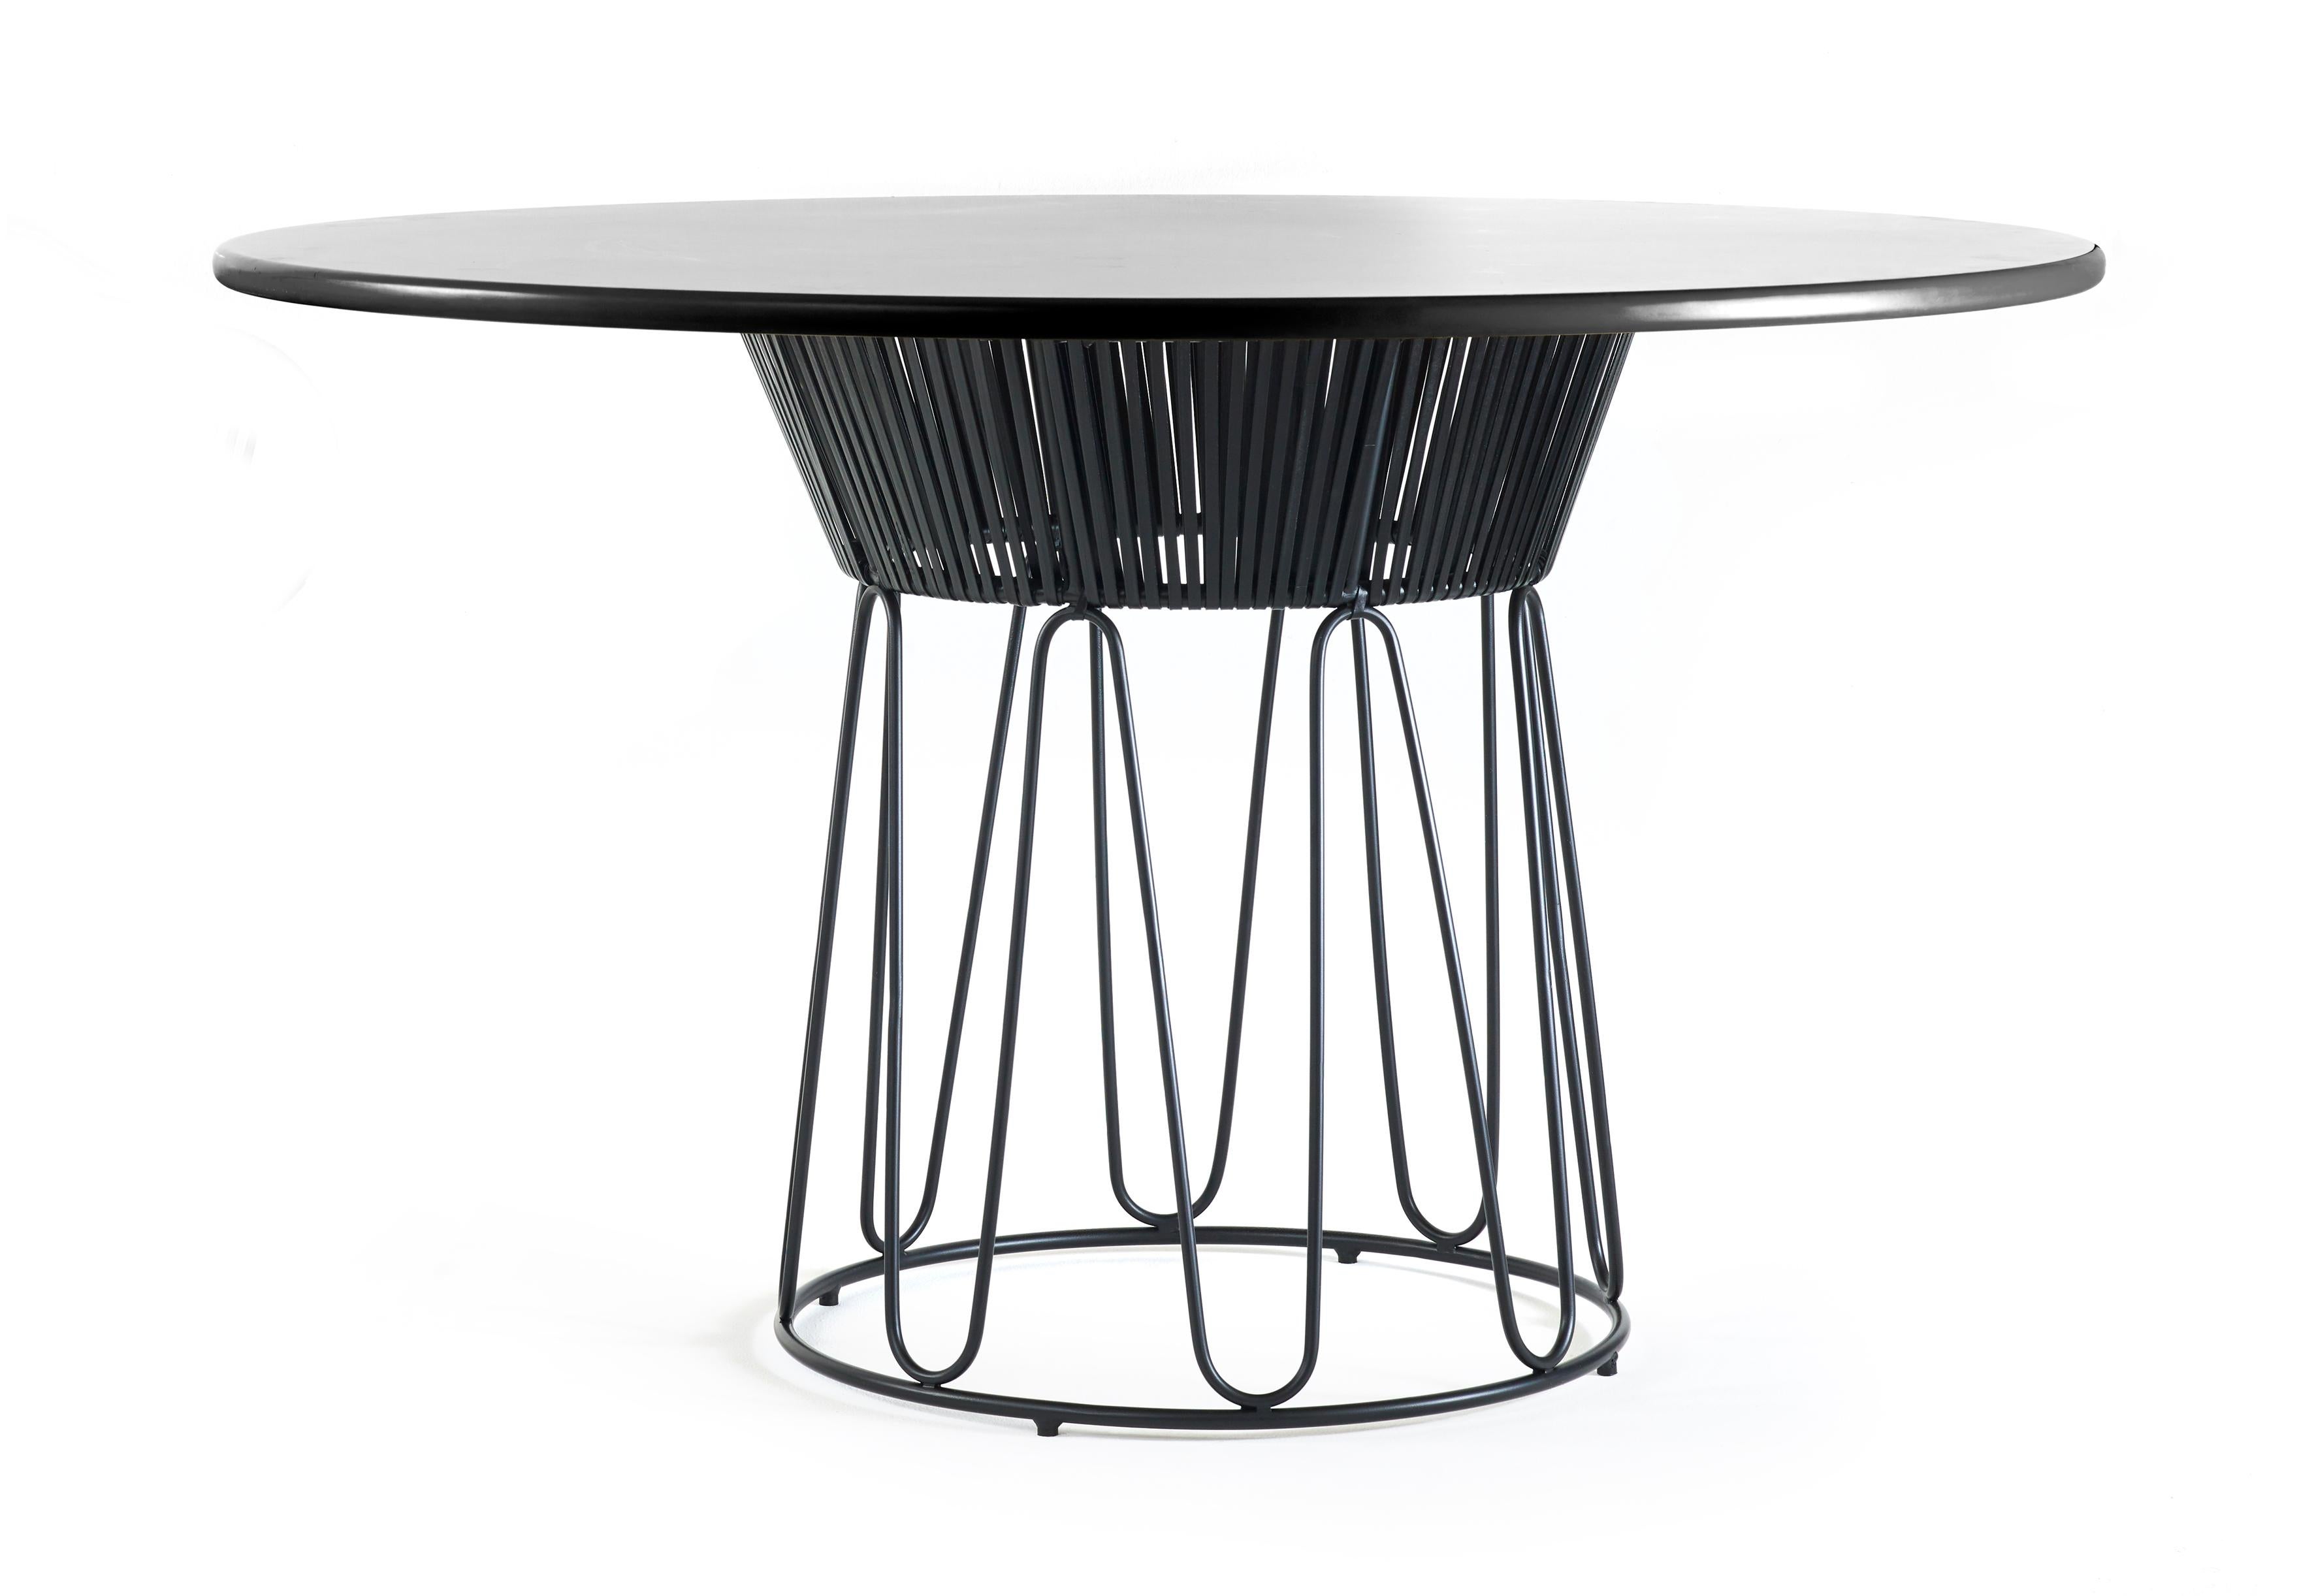 Circo dining table leather by Sebastian Herkner
Materials: Galvanized and powder-coated tubular steel. Aluminum top. Leather. 
Technique: Weaved by local craftspeople in Colombia. 
Dimensions: 
Top diameter 135 cm 
Base diameter 59 x height